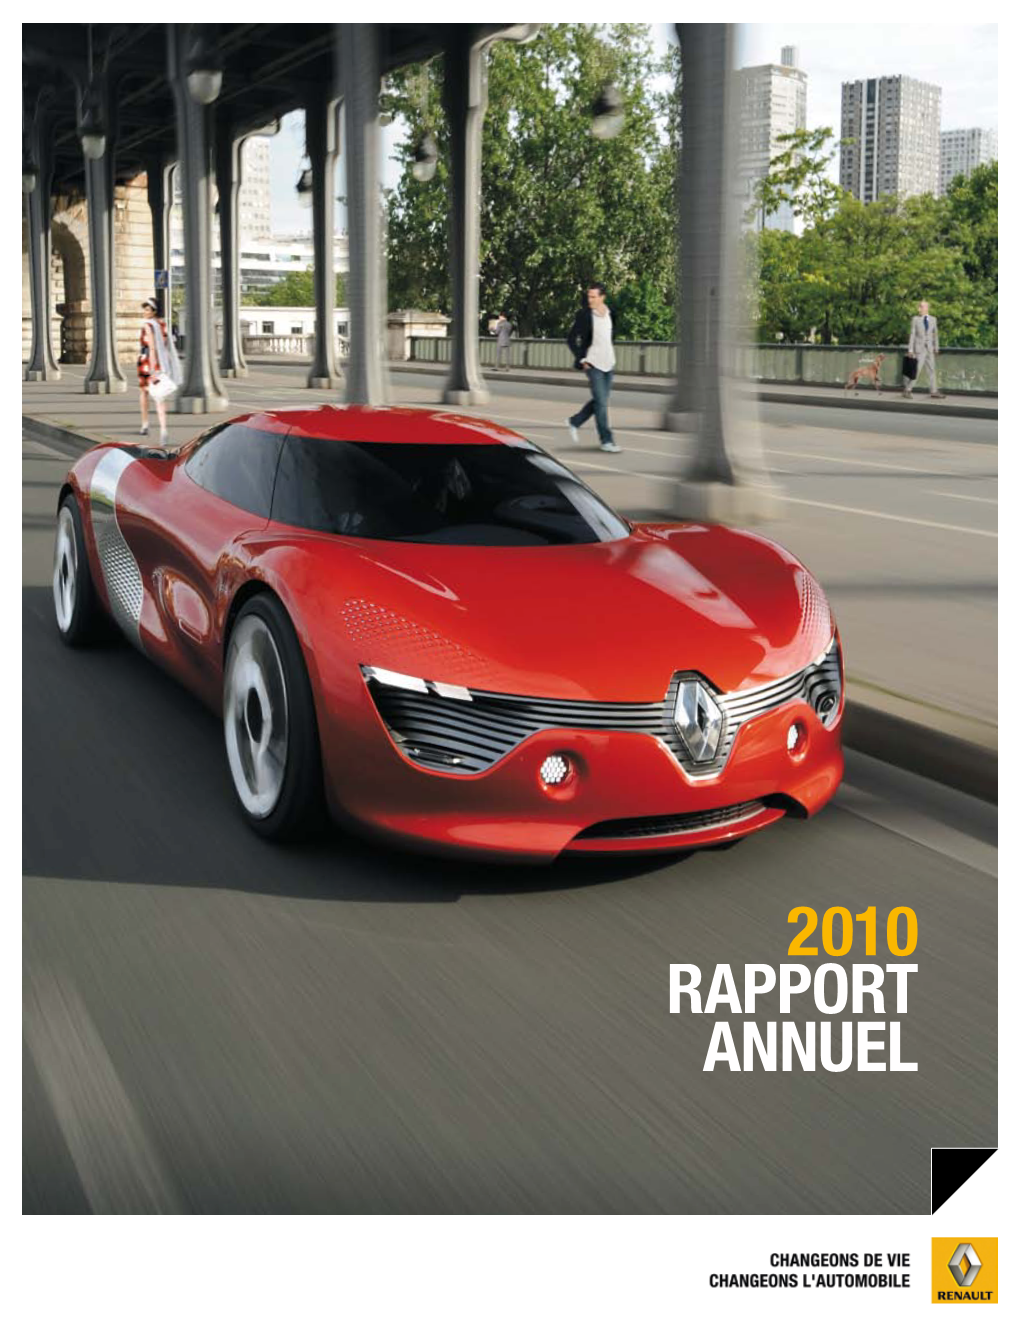 2010 Rapport Annuel